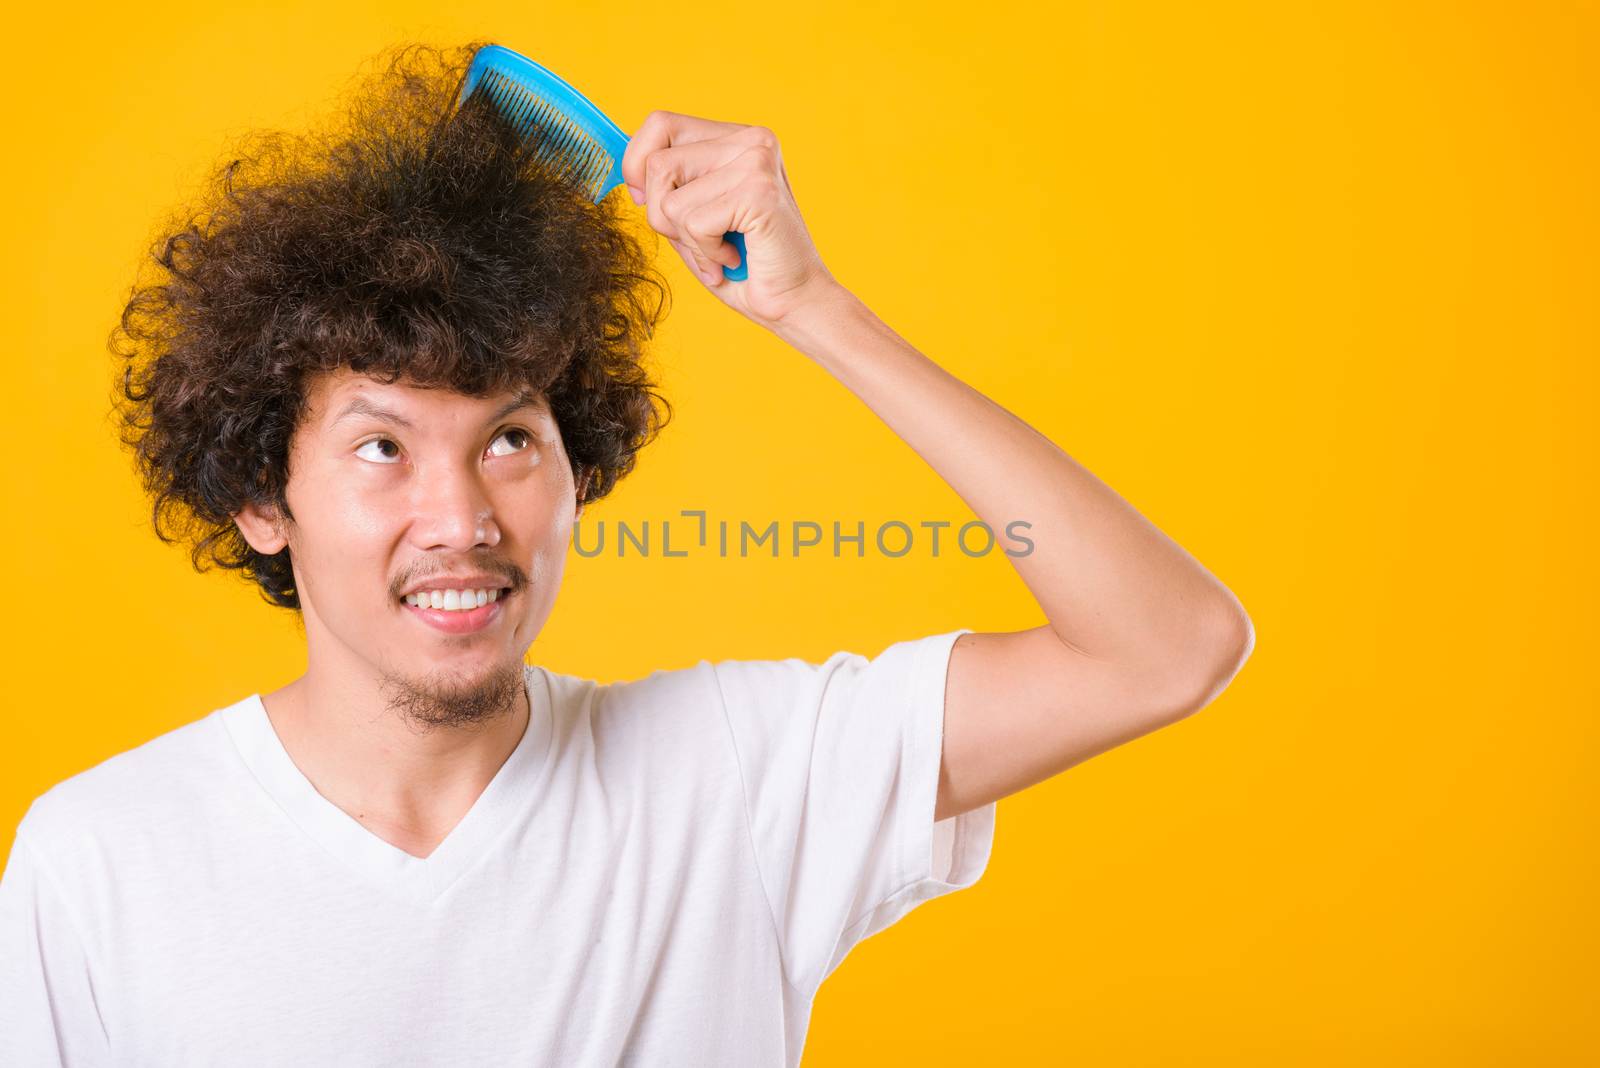 Asian man combing curly hair on yellow background with copy space for text